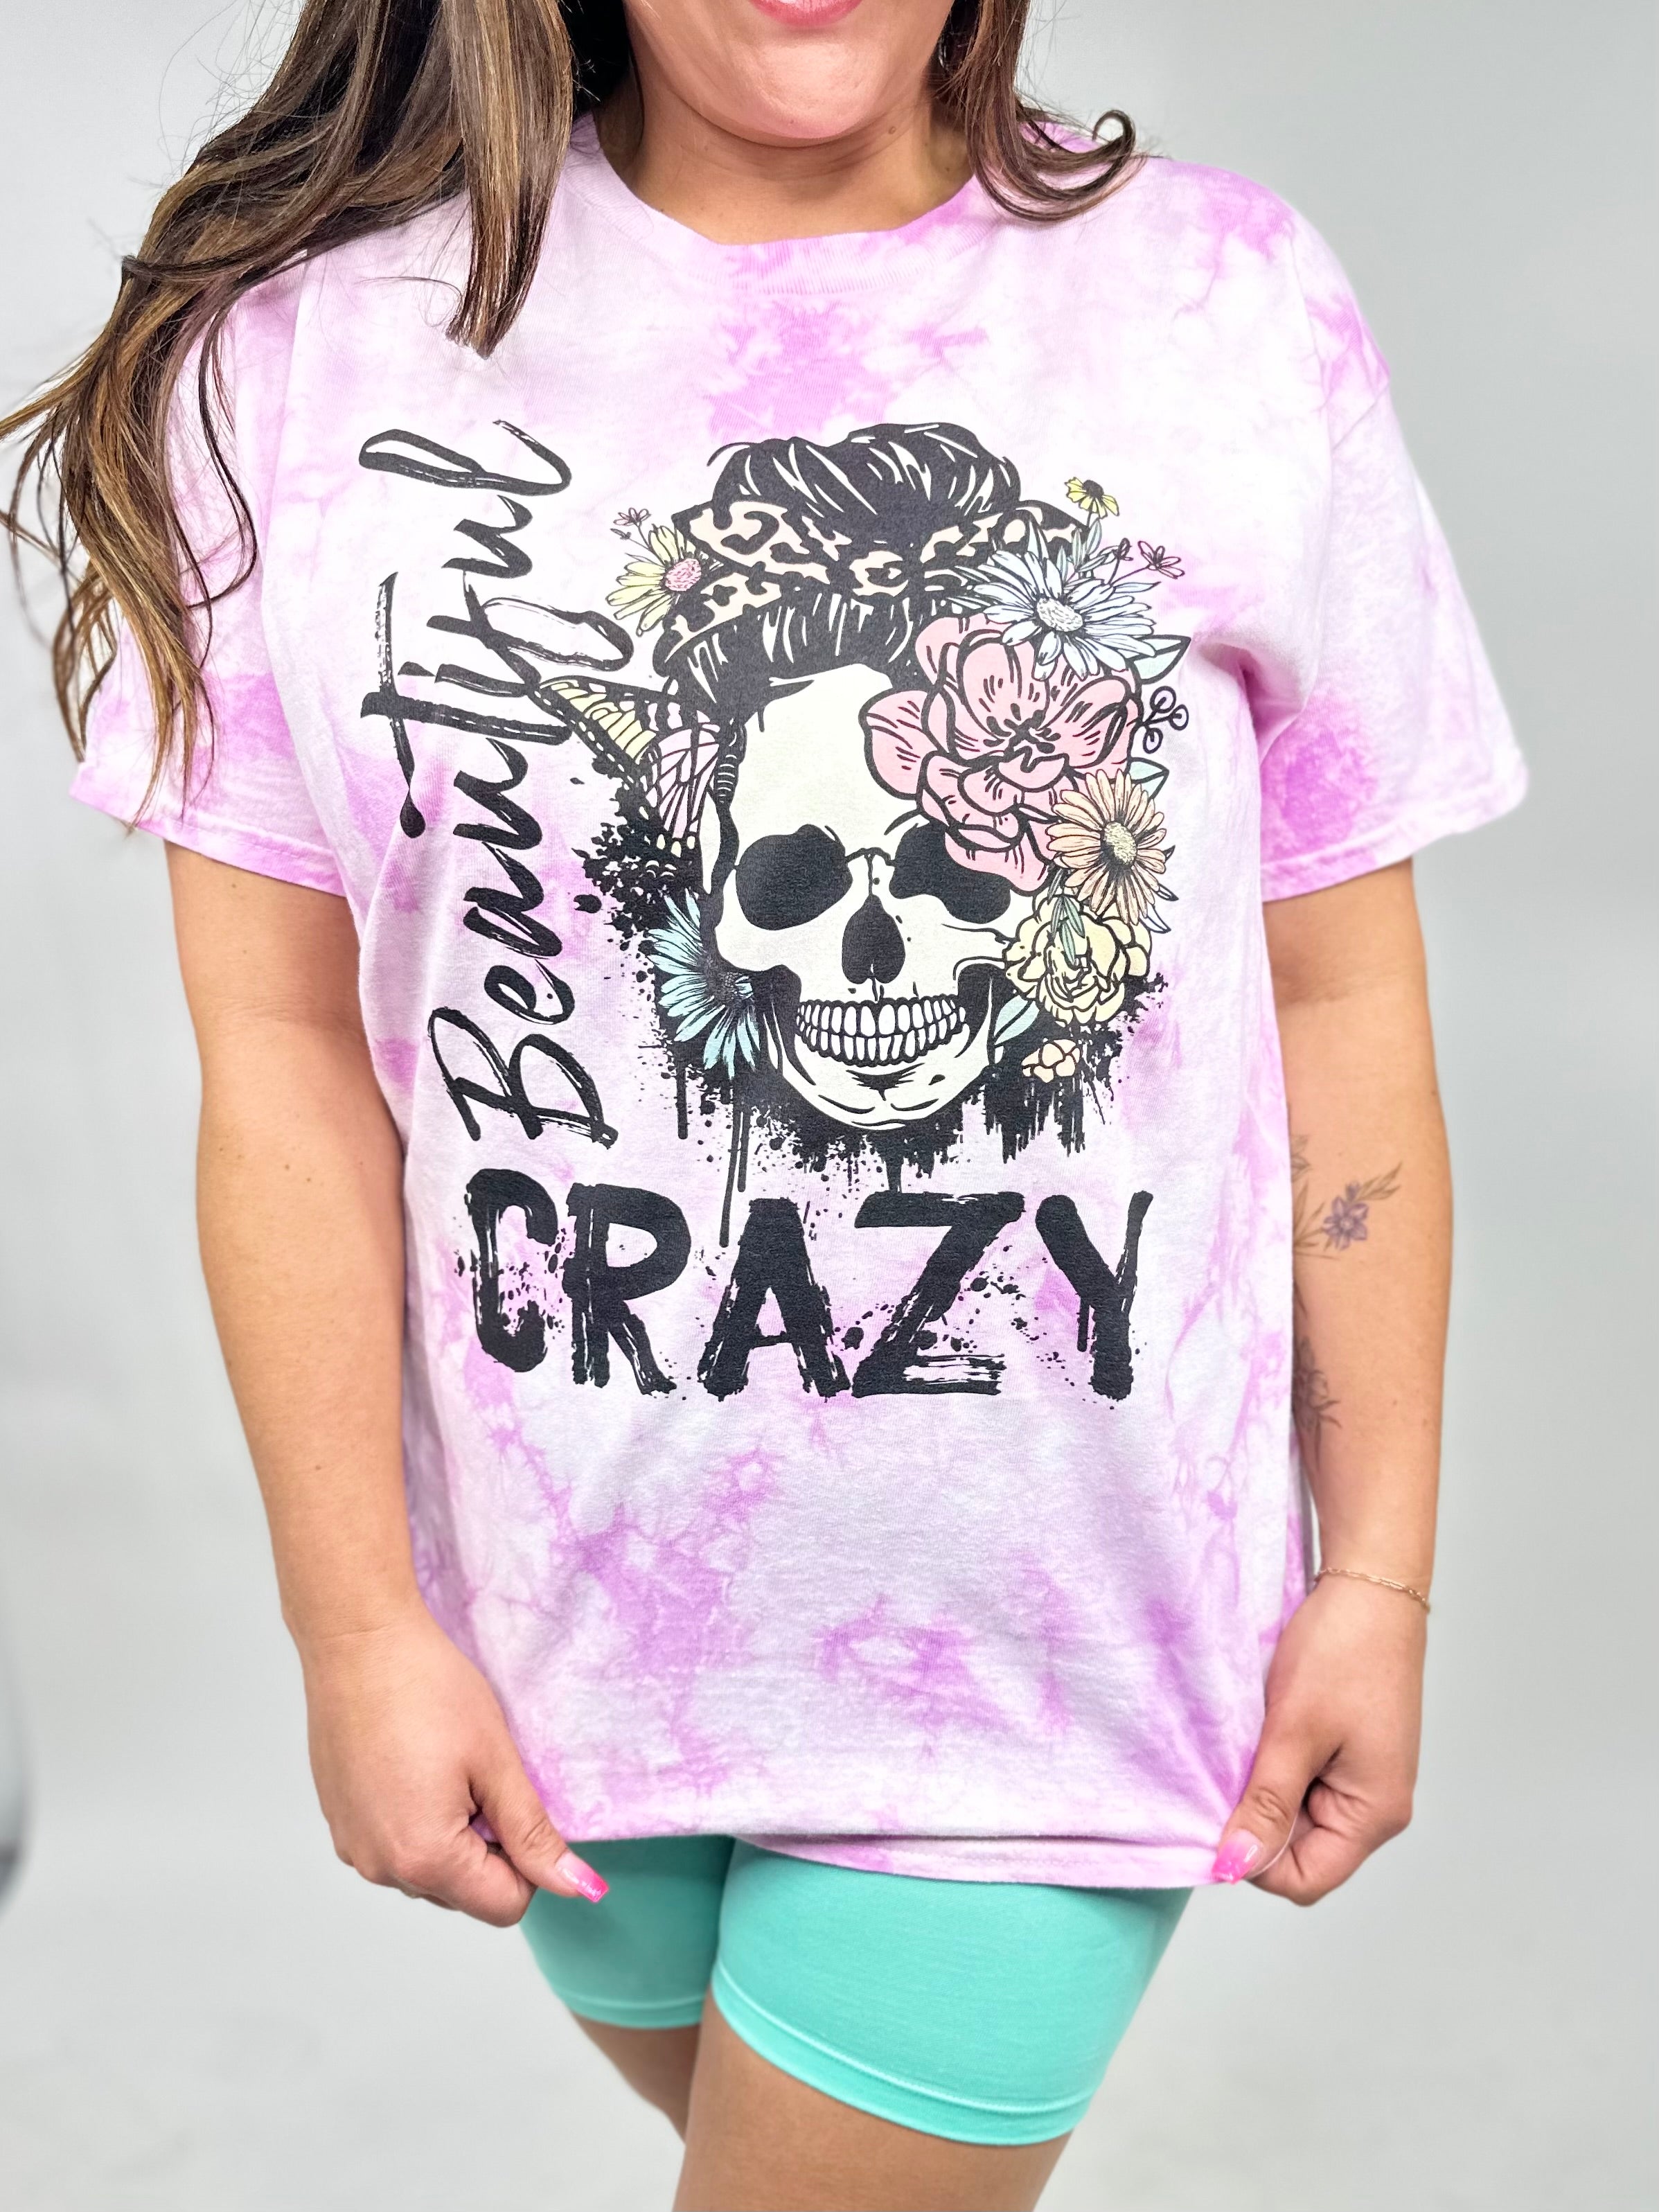 Beautiful Crazy Graphic Tee-130 Graphic Tees-Heathered Boho-Heathered Boho Boutique, Women's Fashion and Accessories in Palmetto, FL